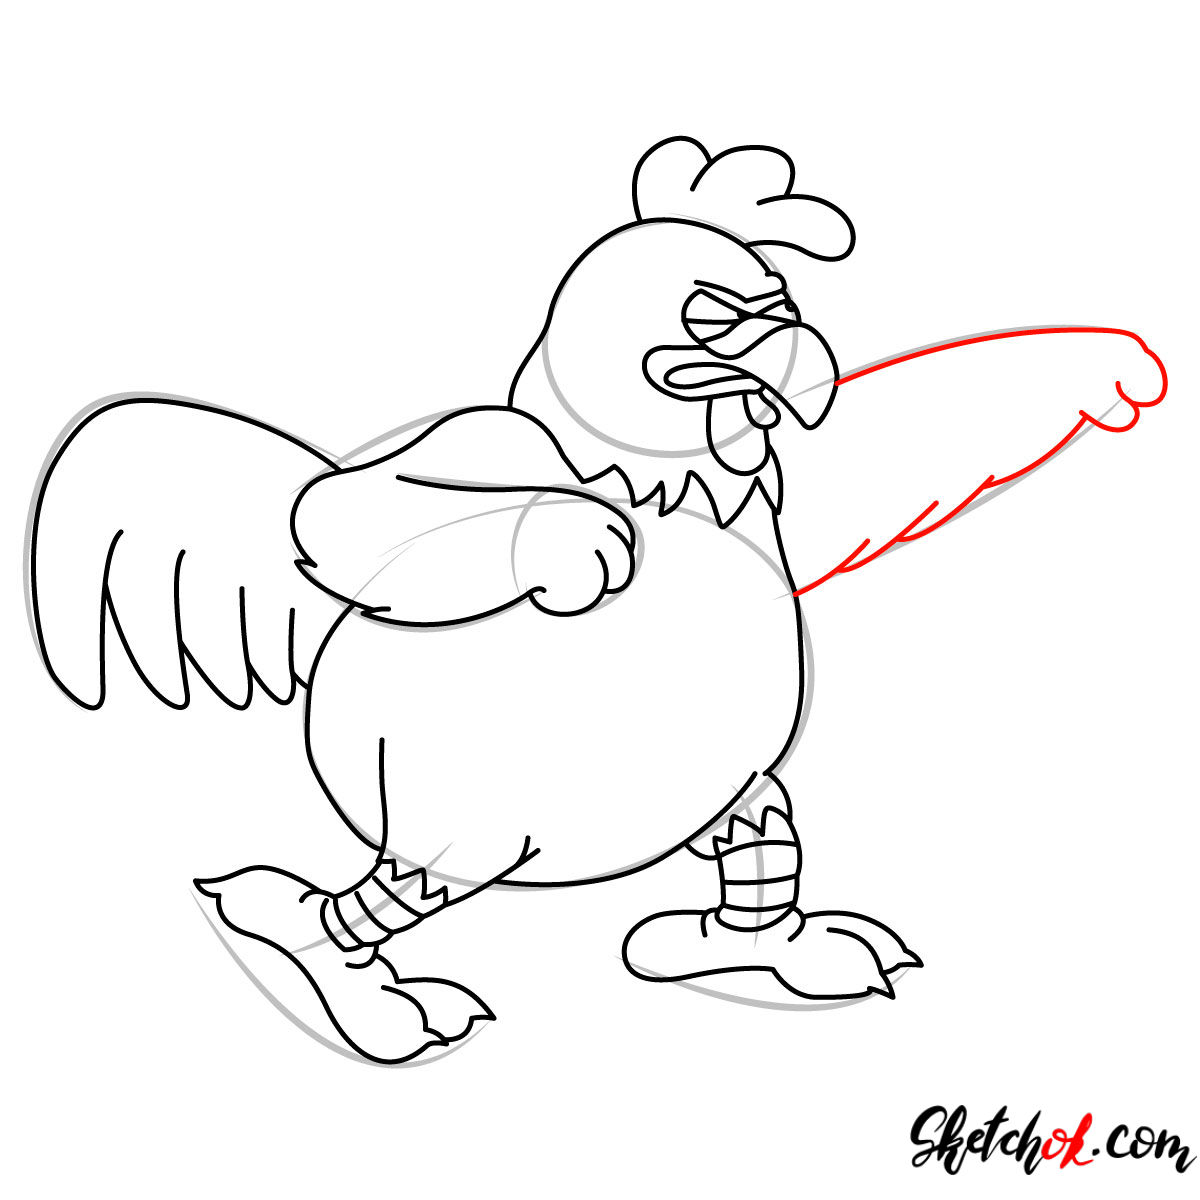 How to draw Ernie the Giant Chicken - step 10